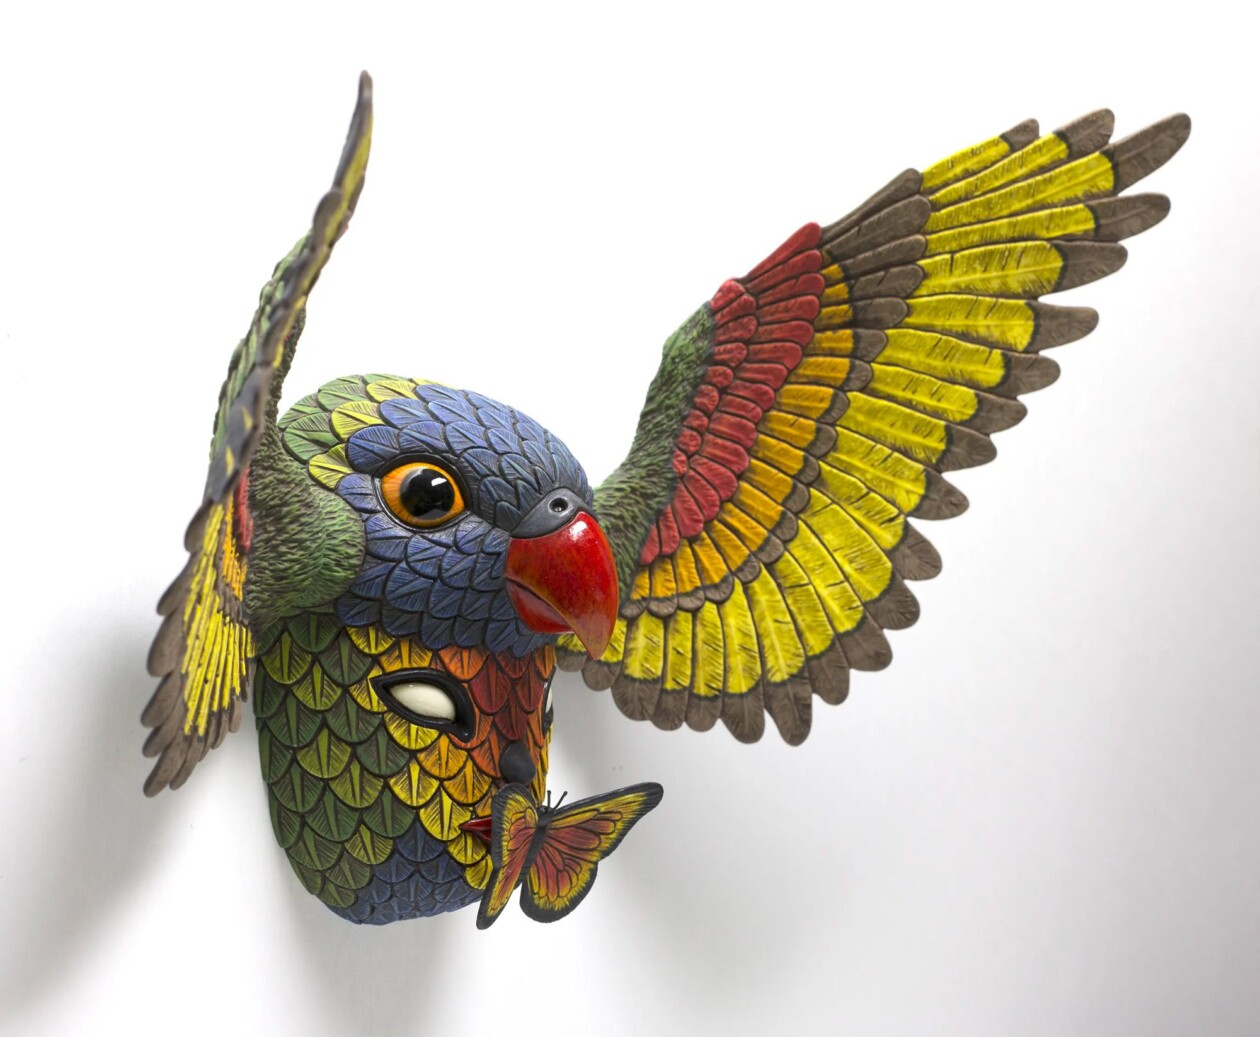 Marvelous Anthropomorphized Bird Sculptures By Calvin Ma (2)